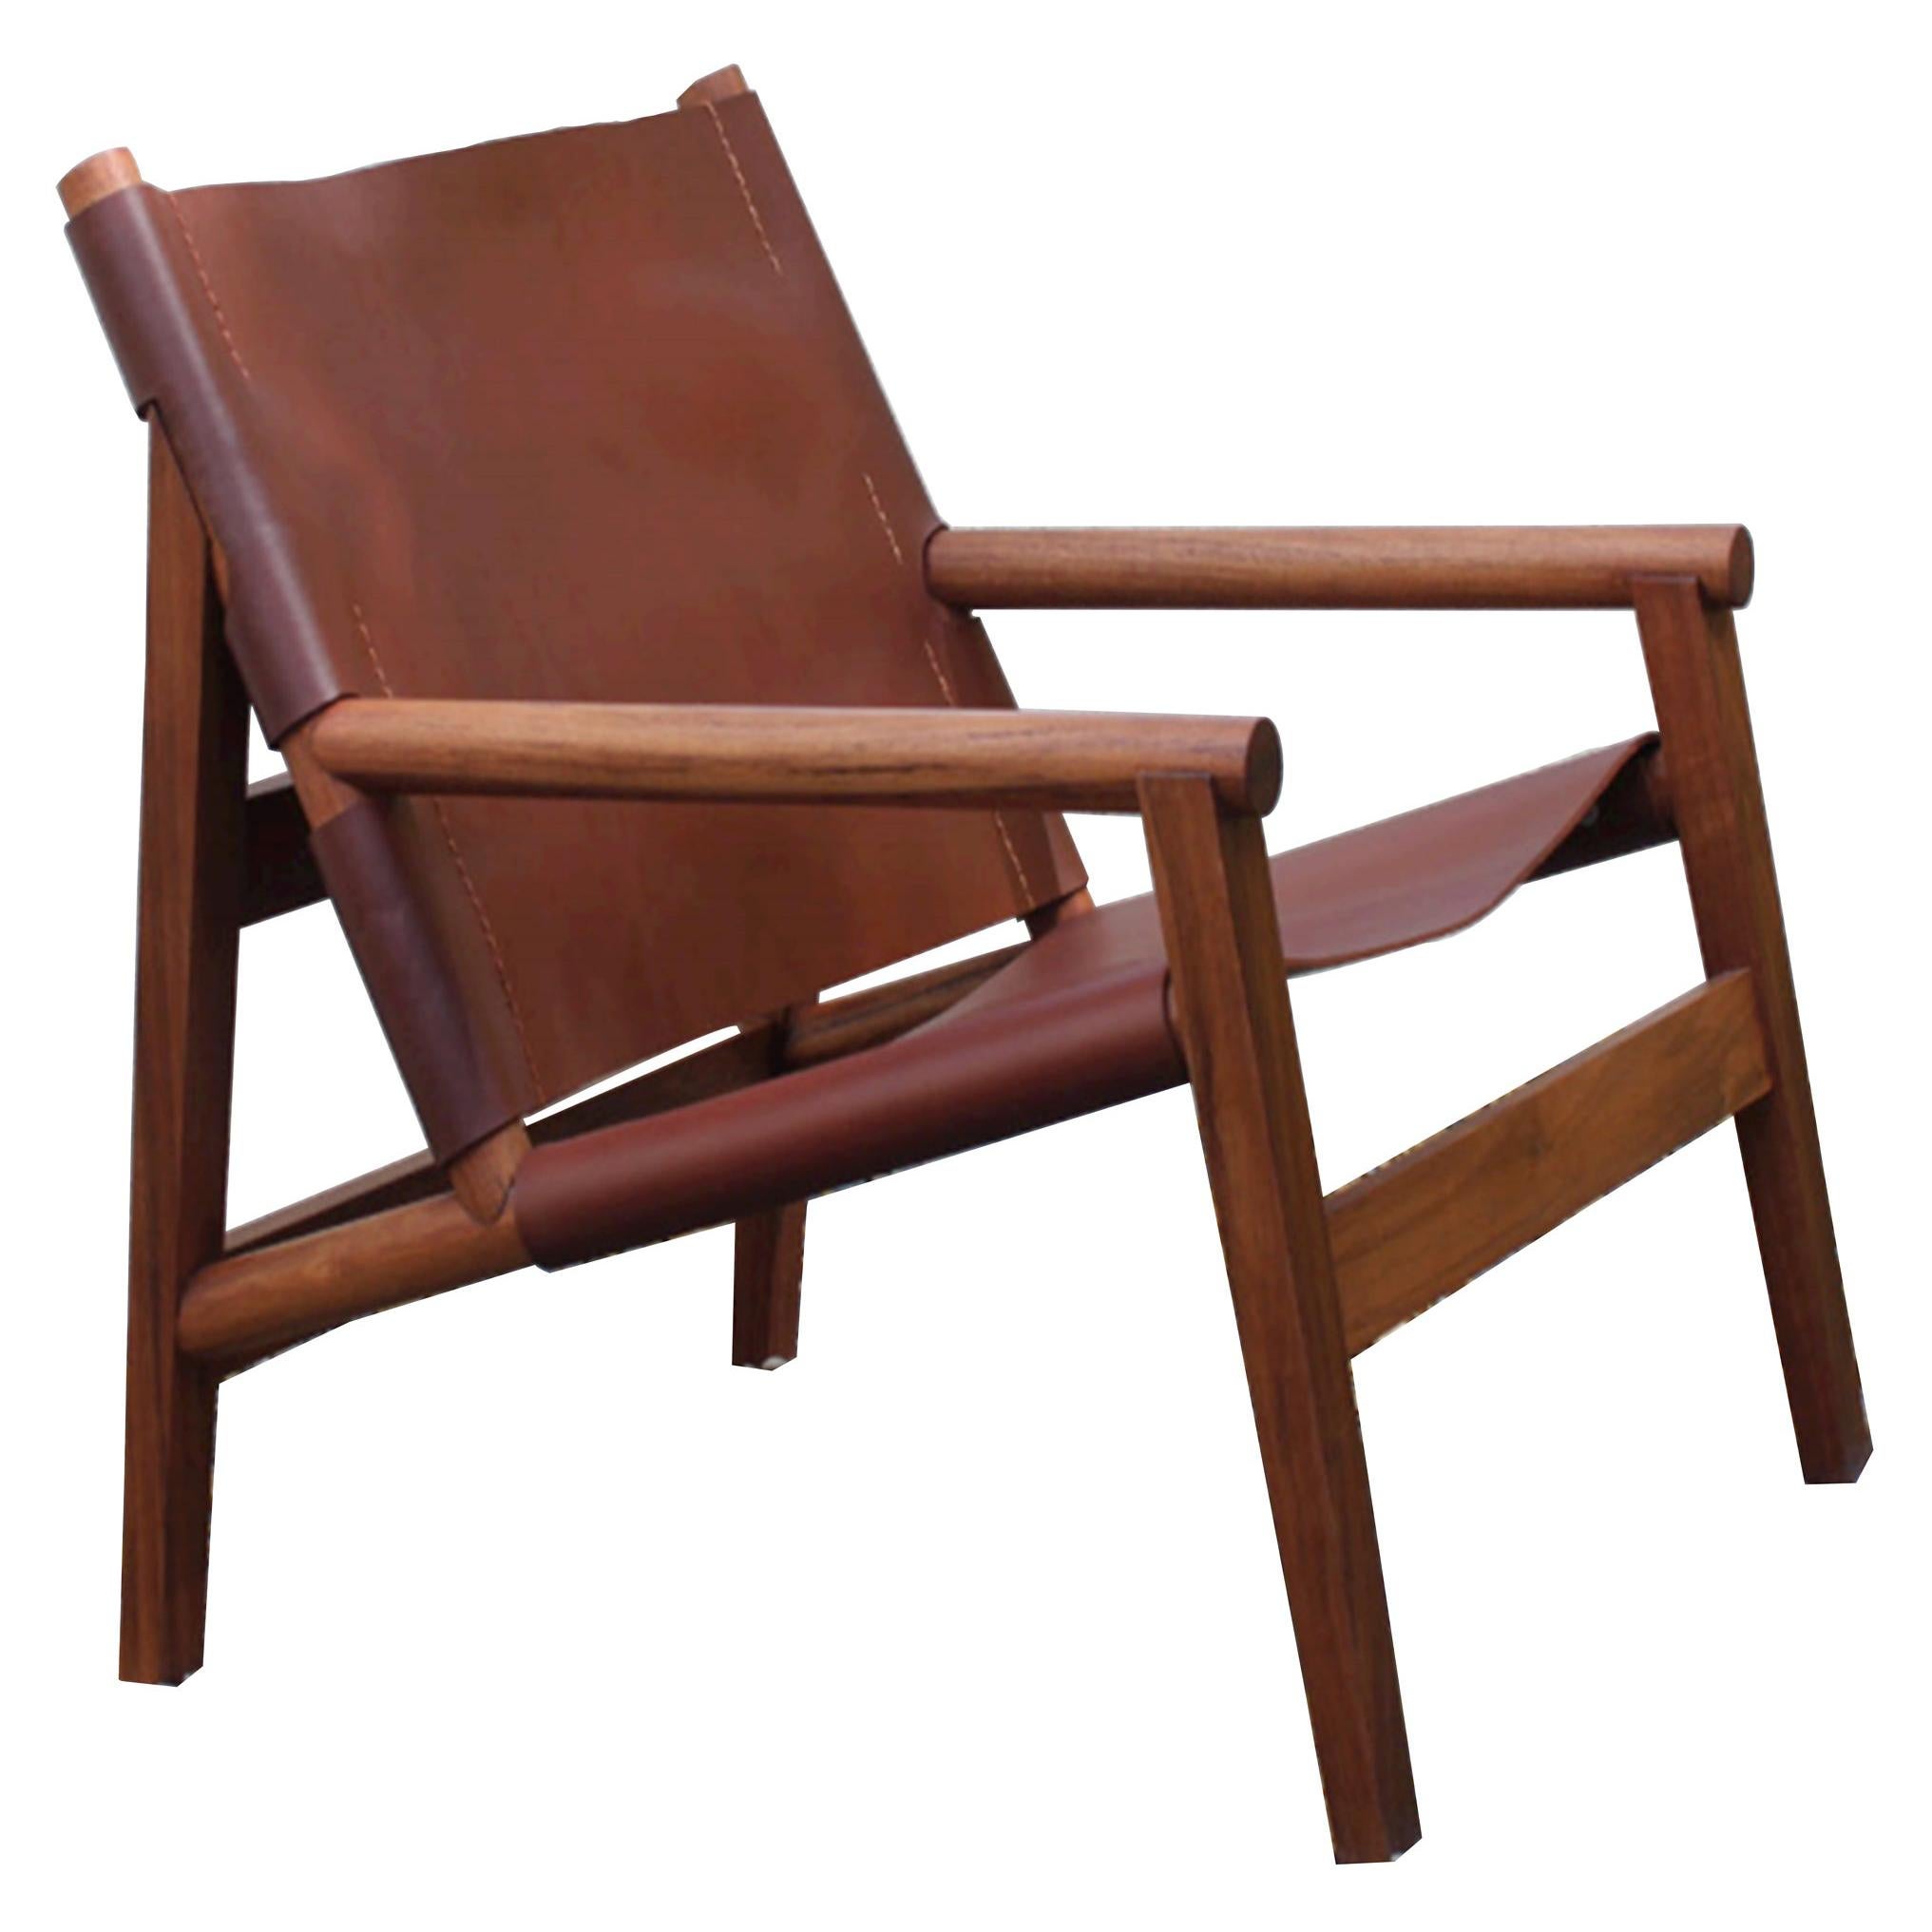 La Colima Chair, Maria Beckmann, Represented by Tuleste Factory